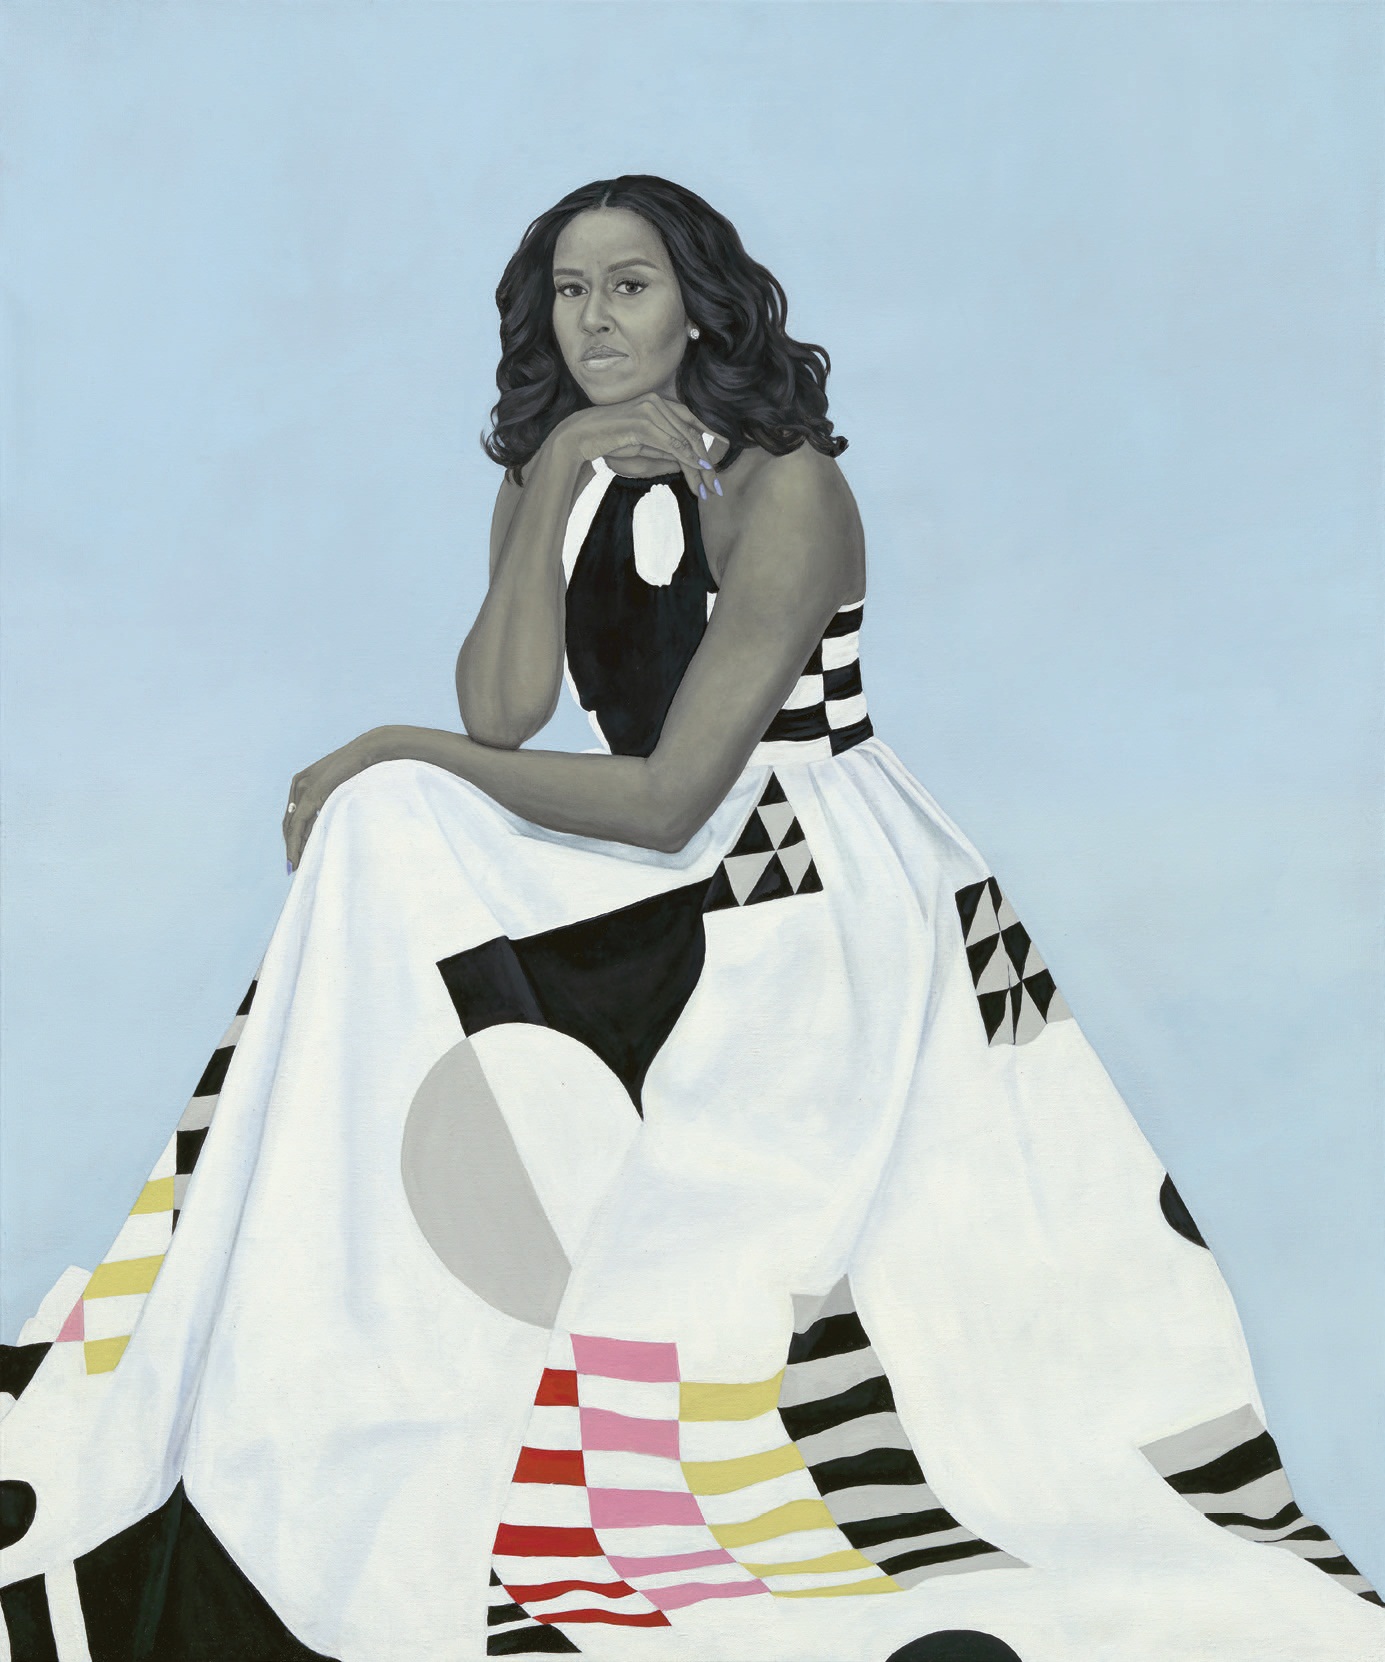 Amy Sherald, “Michelle LaVaughn Robinson Obama” (2018, oil on linen), 72.1 inches by 60.1 inches. PHOTO COURTESY OF THE SMITHSONIAN NATIONAL PORTRAIT GALLERY